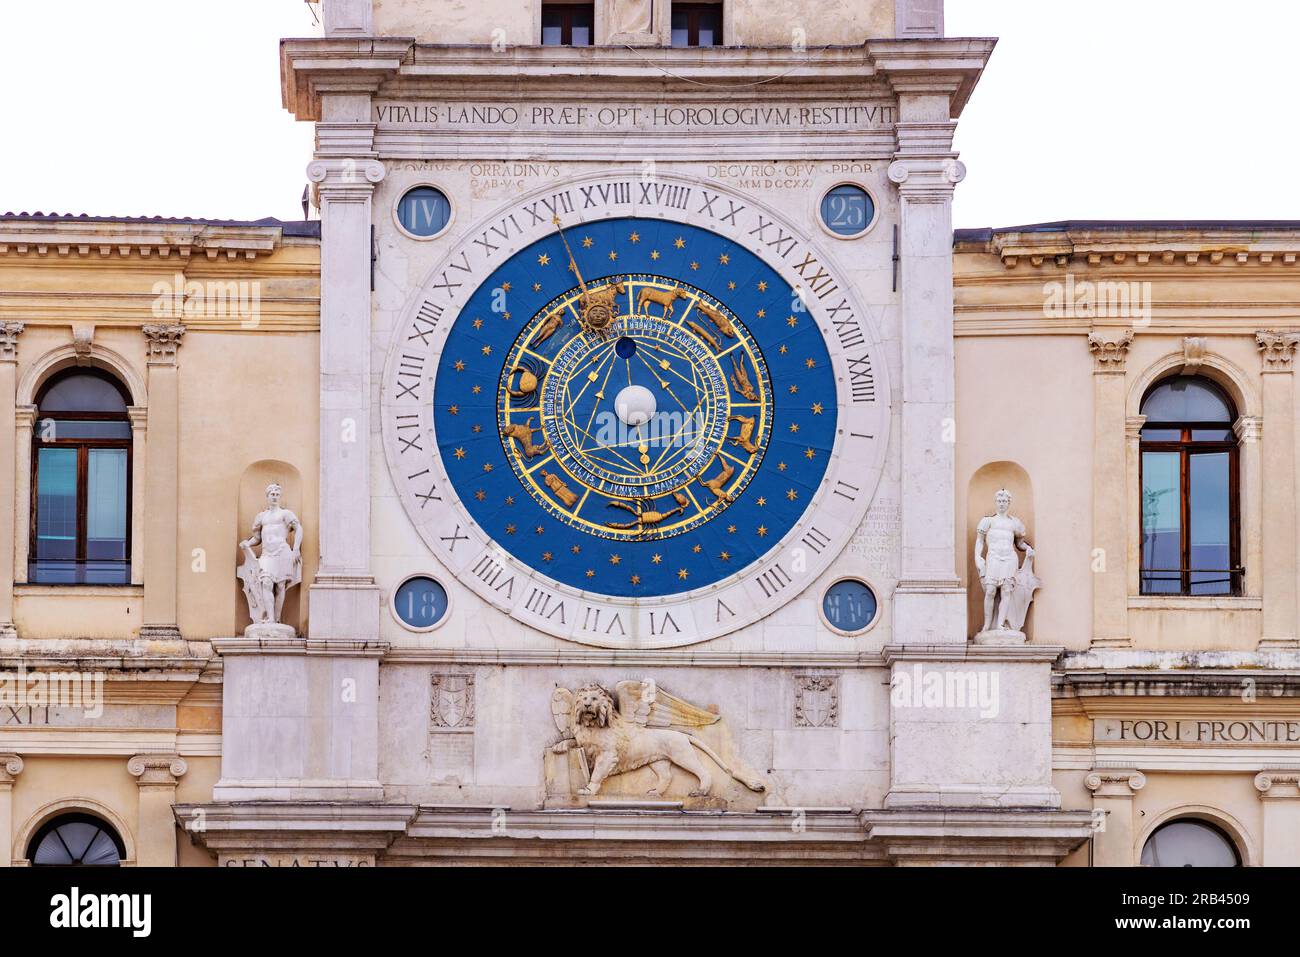 Medieval clock; The Astronomical Clock, dating from 1344, one of the oldest working clocks in the world, Piazza dei Signori, Padua Italy Stock Photo